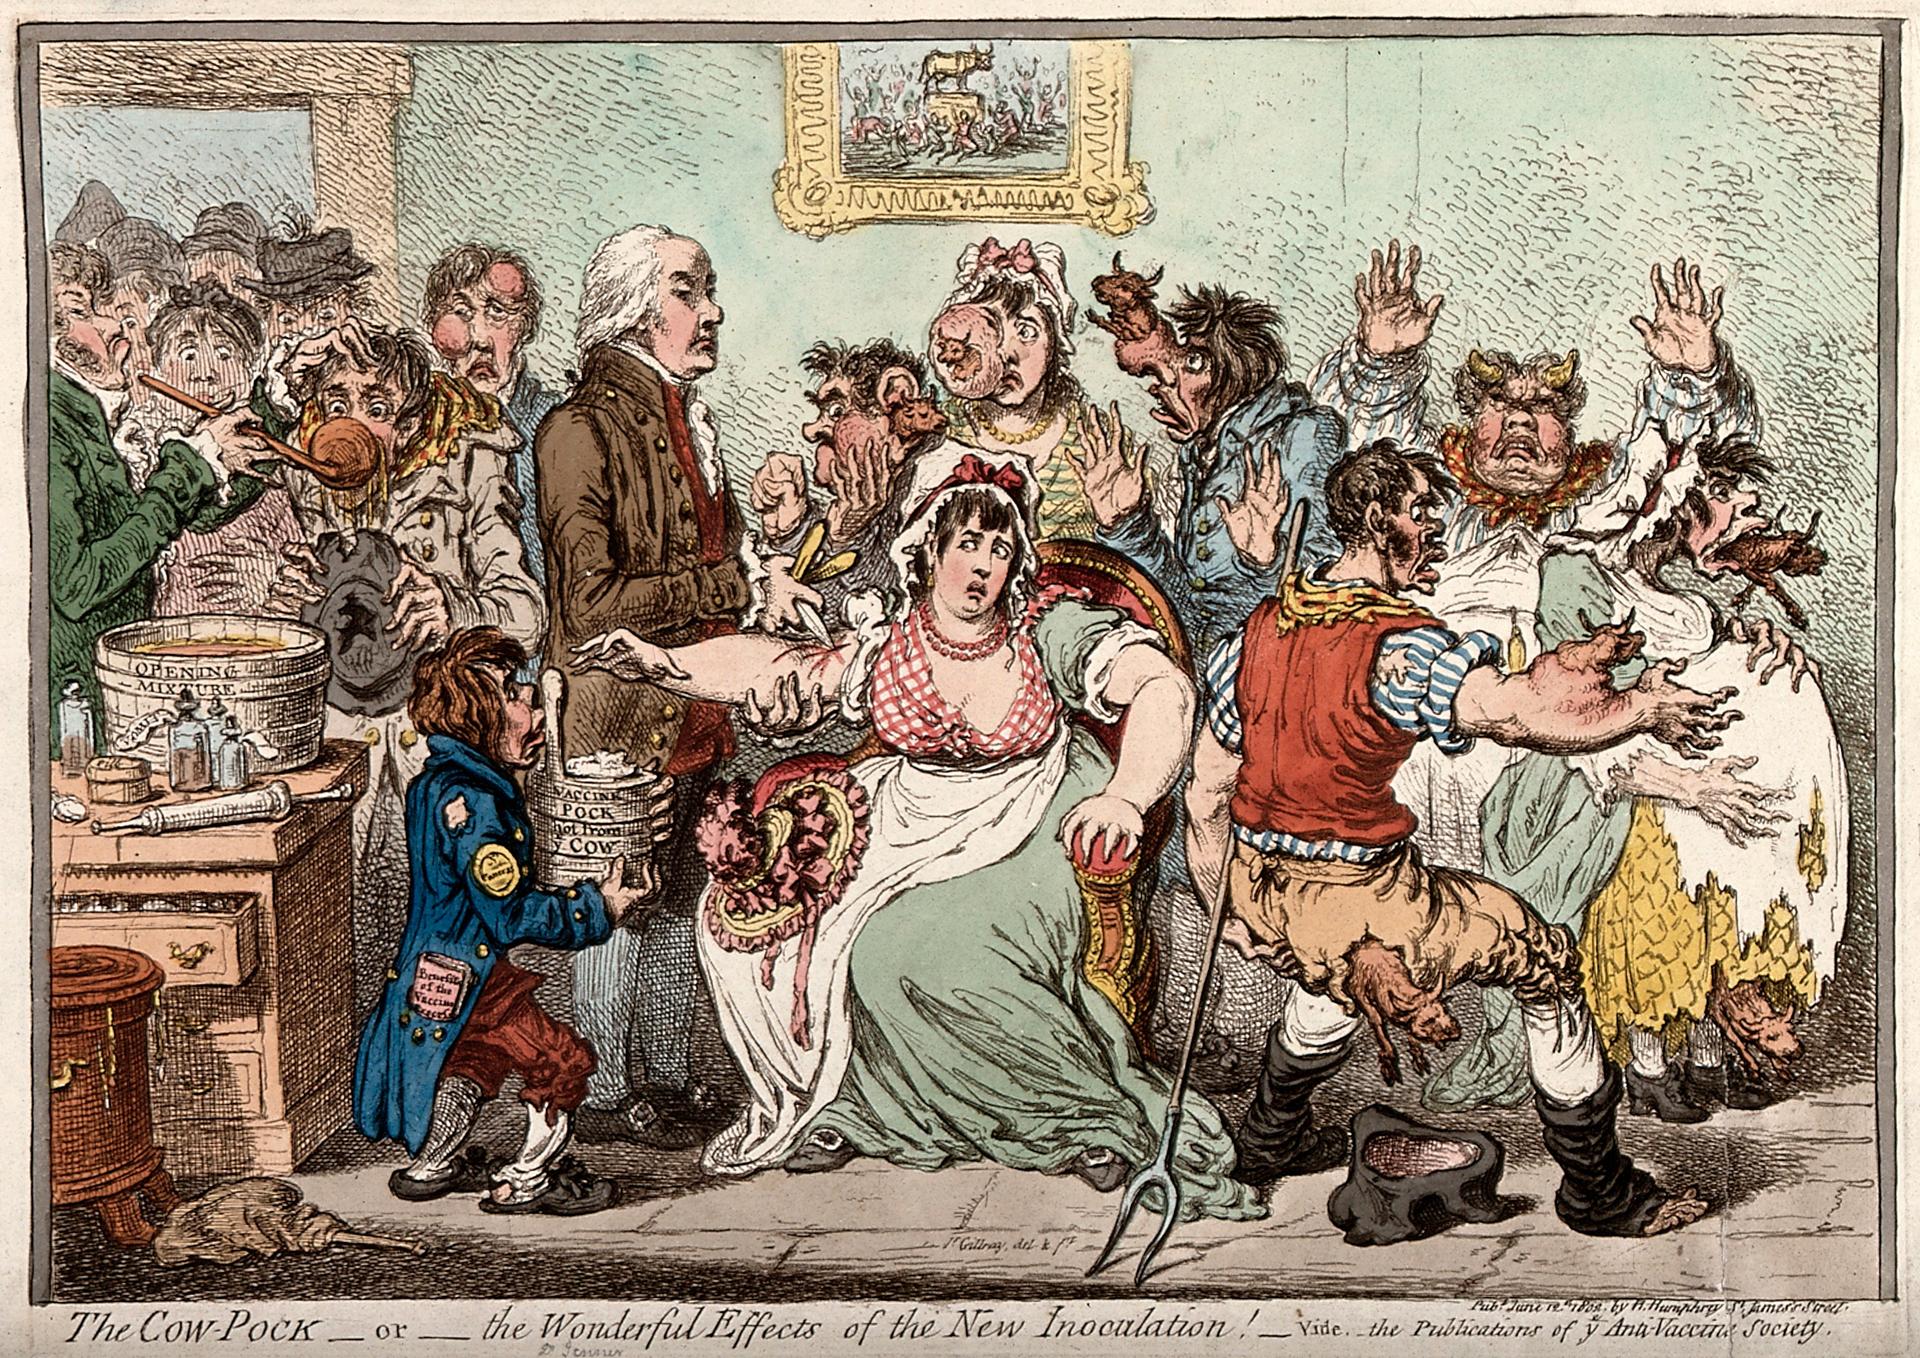 Caricature of Edward Jenner inoculating patients in the Smallpox and Inoculation Hospital at St. Pancras.